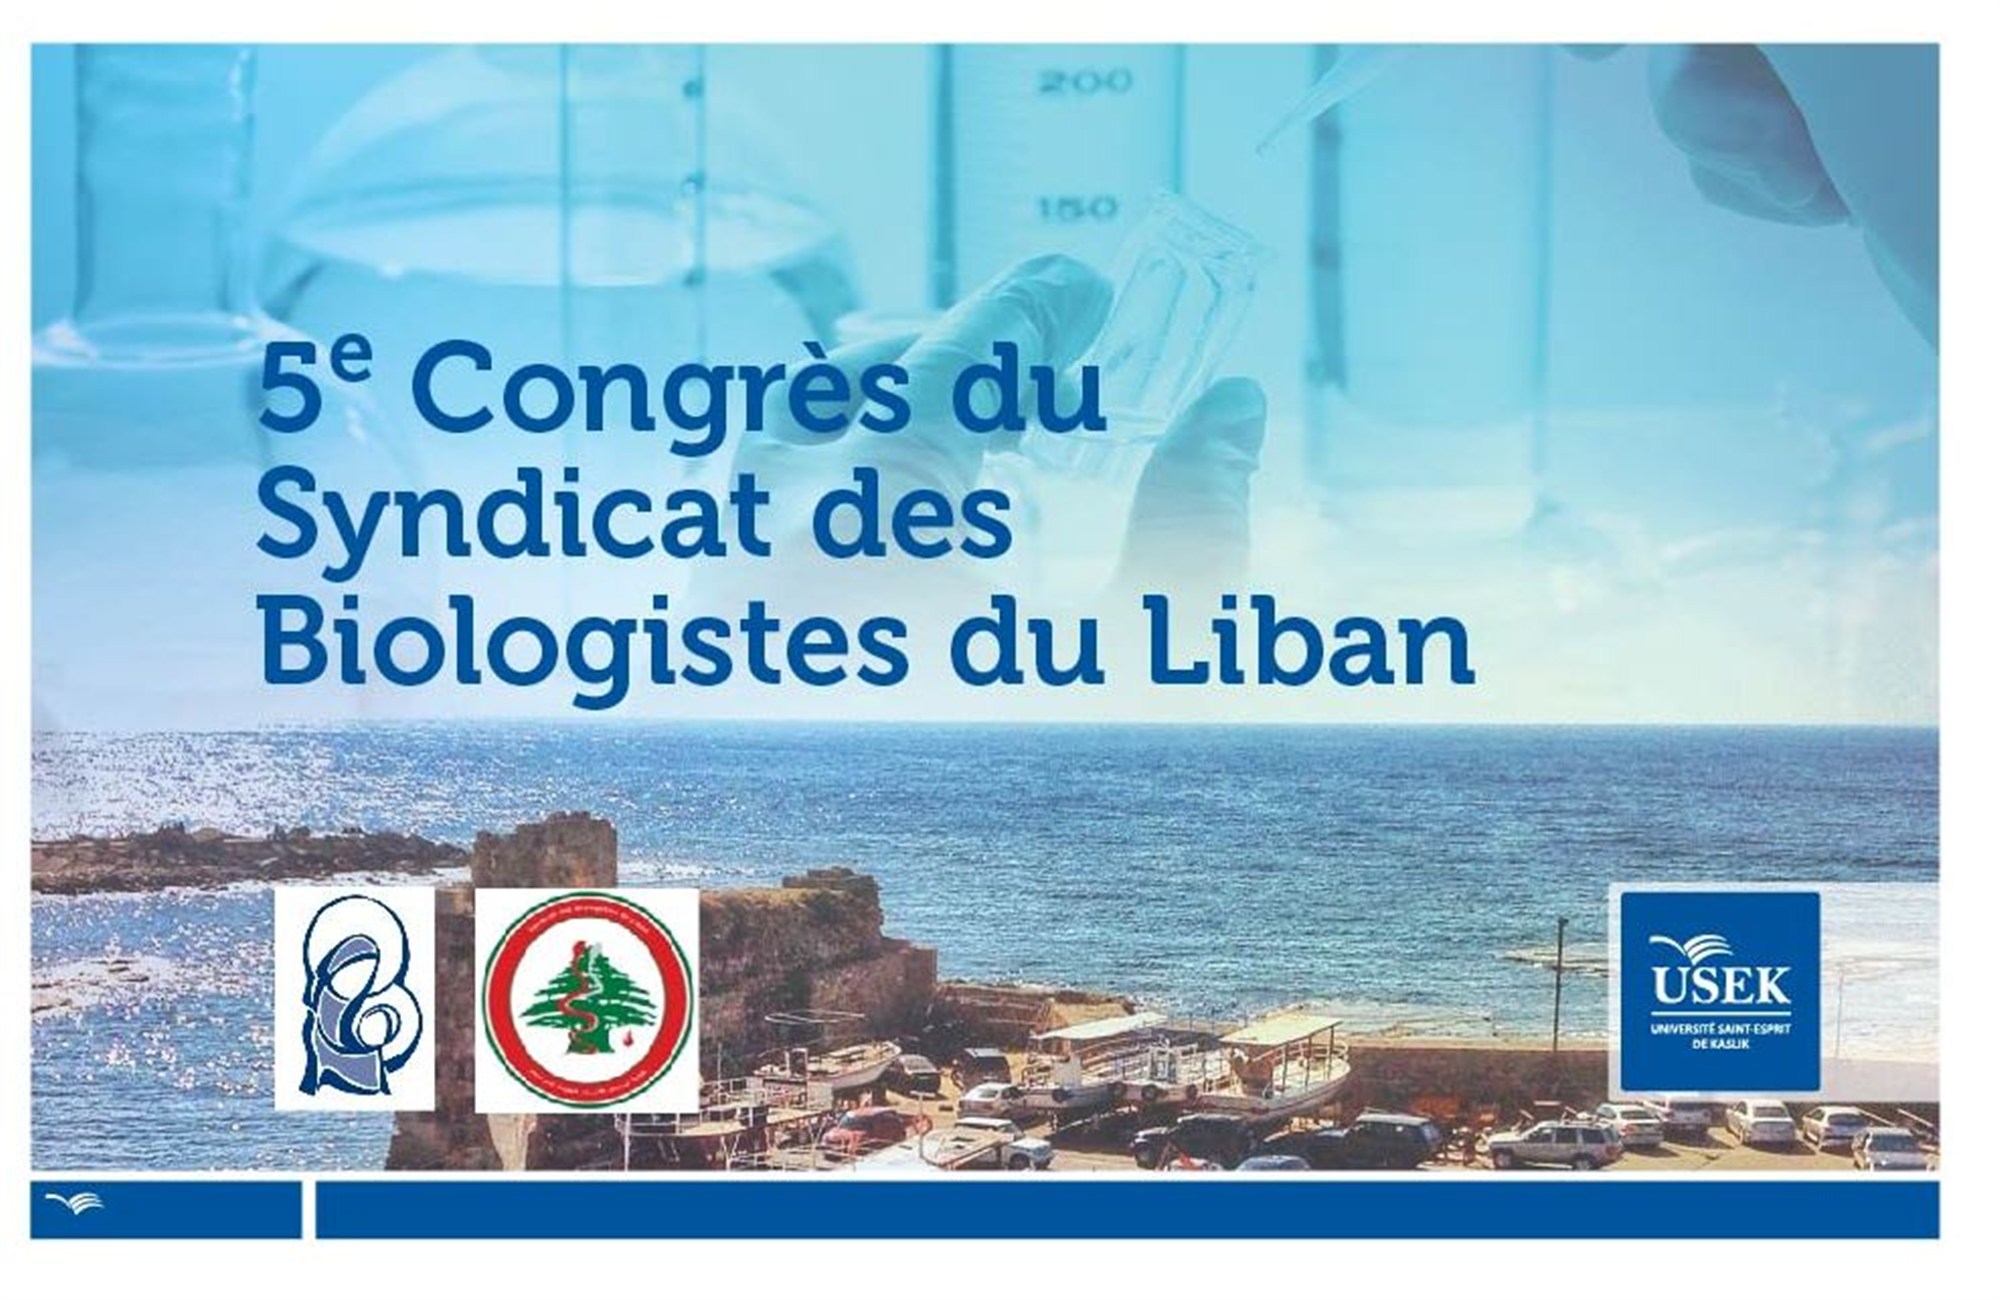  5th Congress of the Union of the Lebanese Biologists